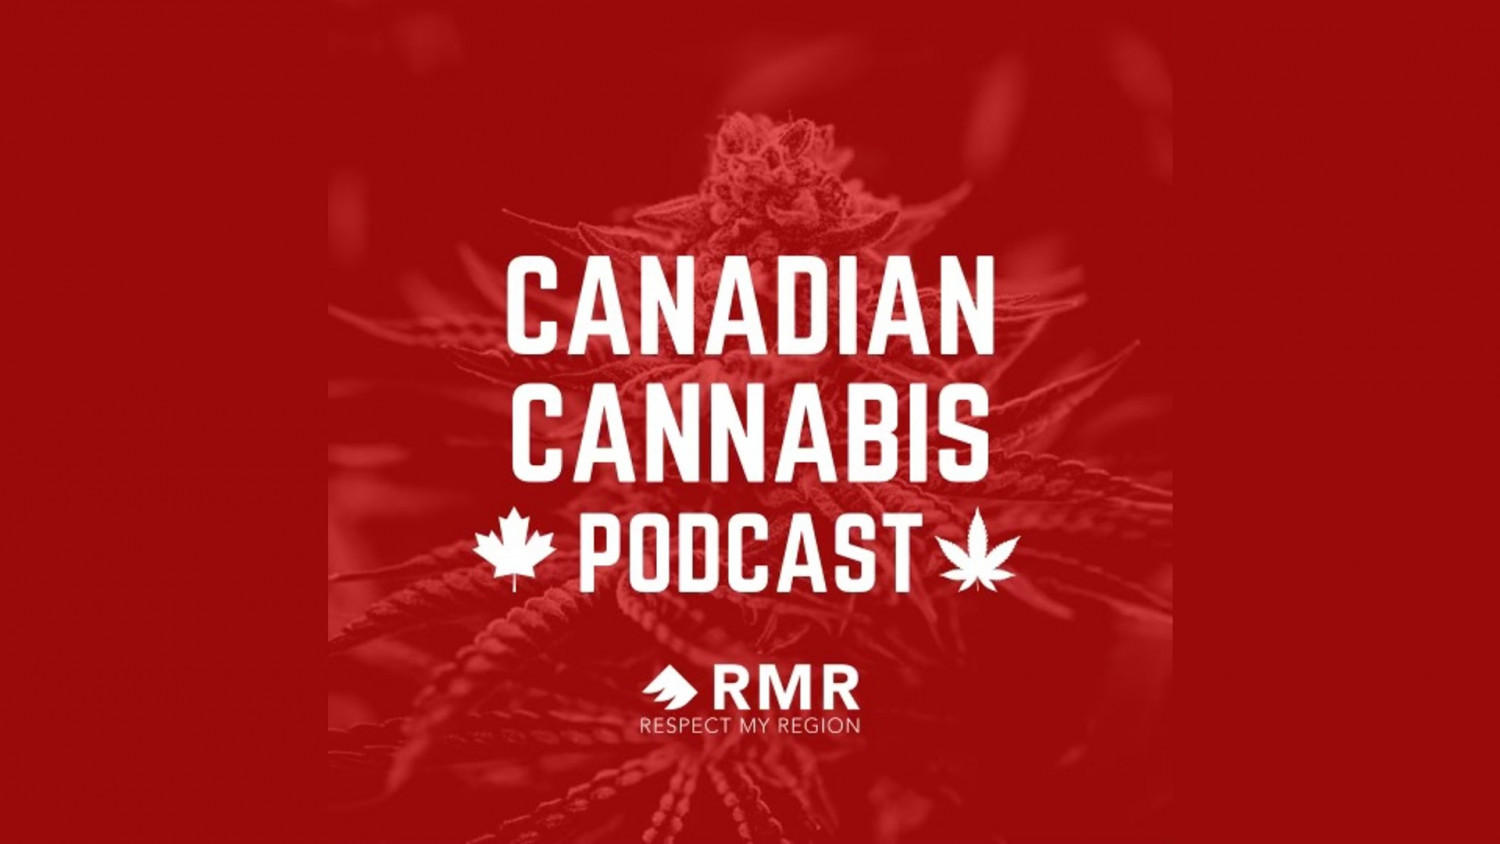 Canadian Cannabis Podcast on Respect My Region